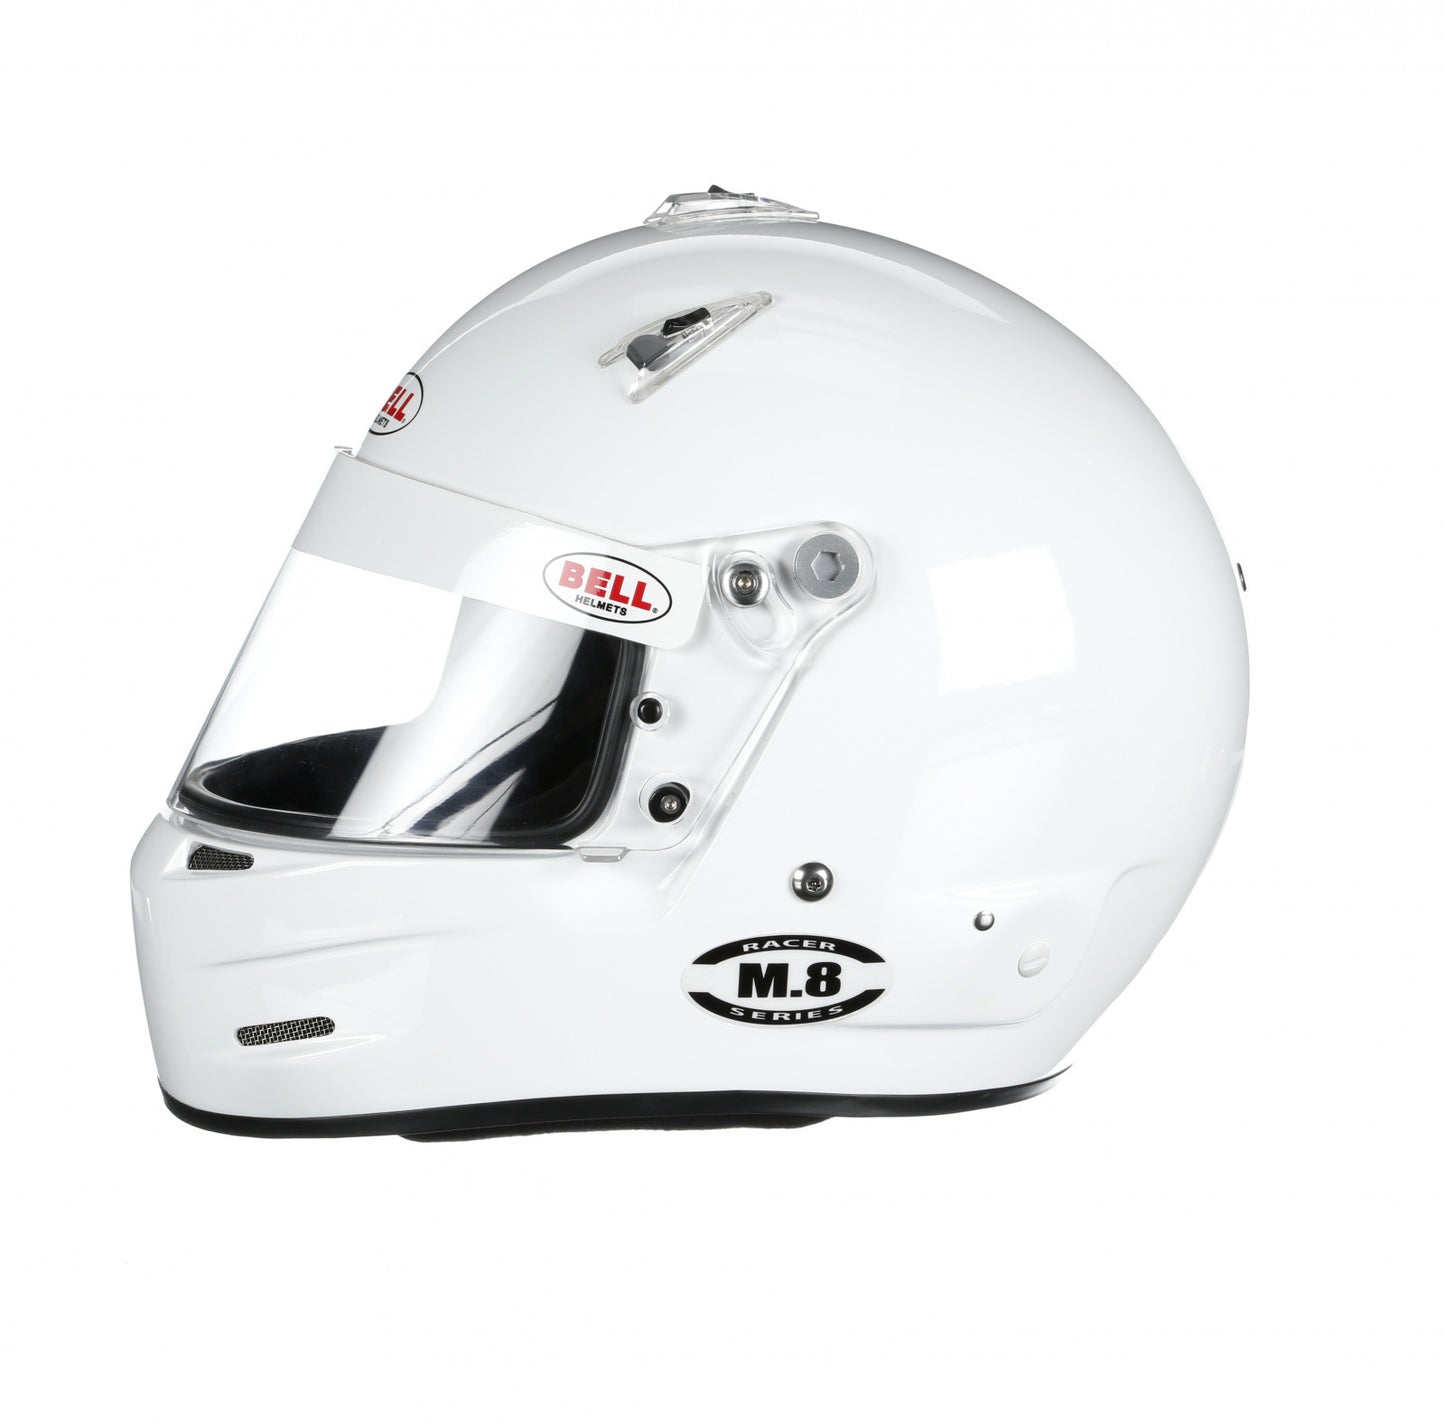 Bell M8 Racing Helmet-White Size Large 1419A05